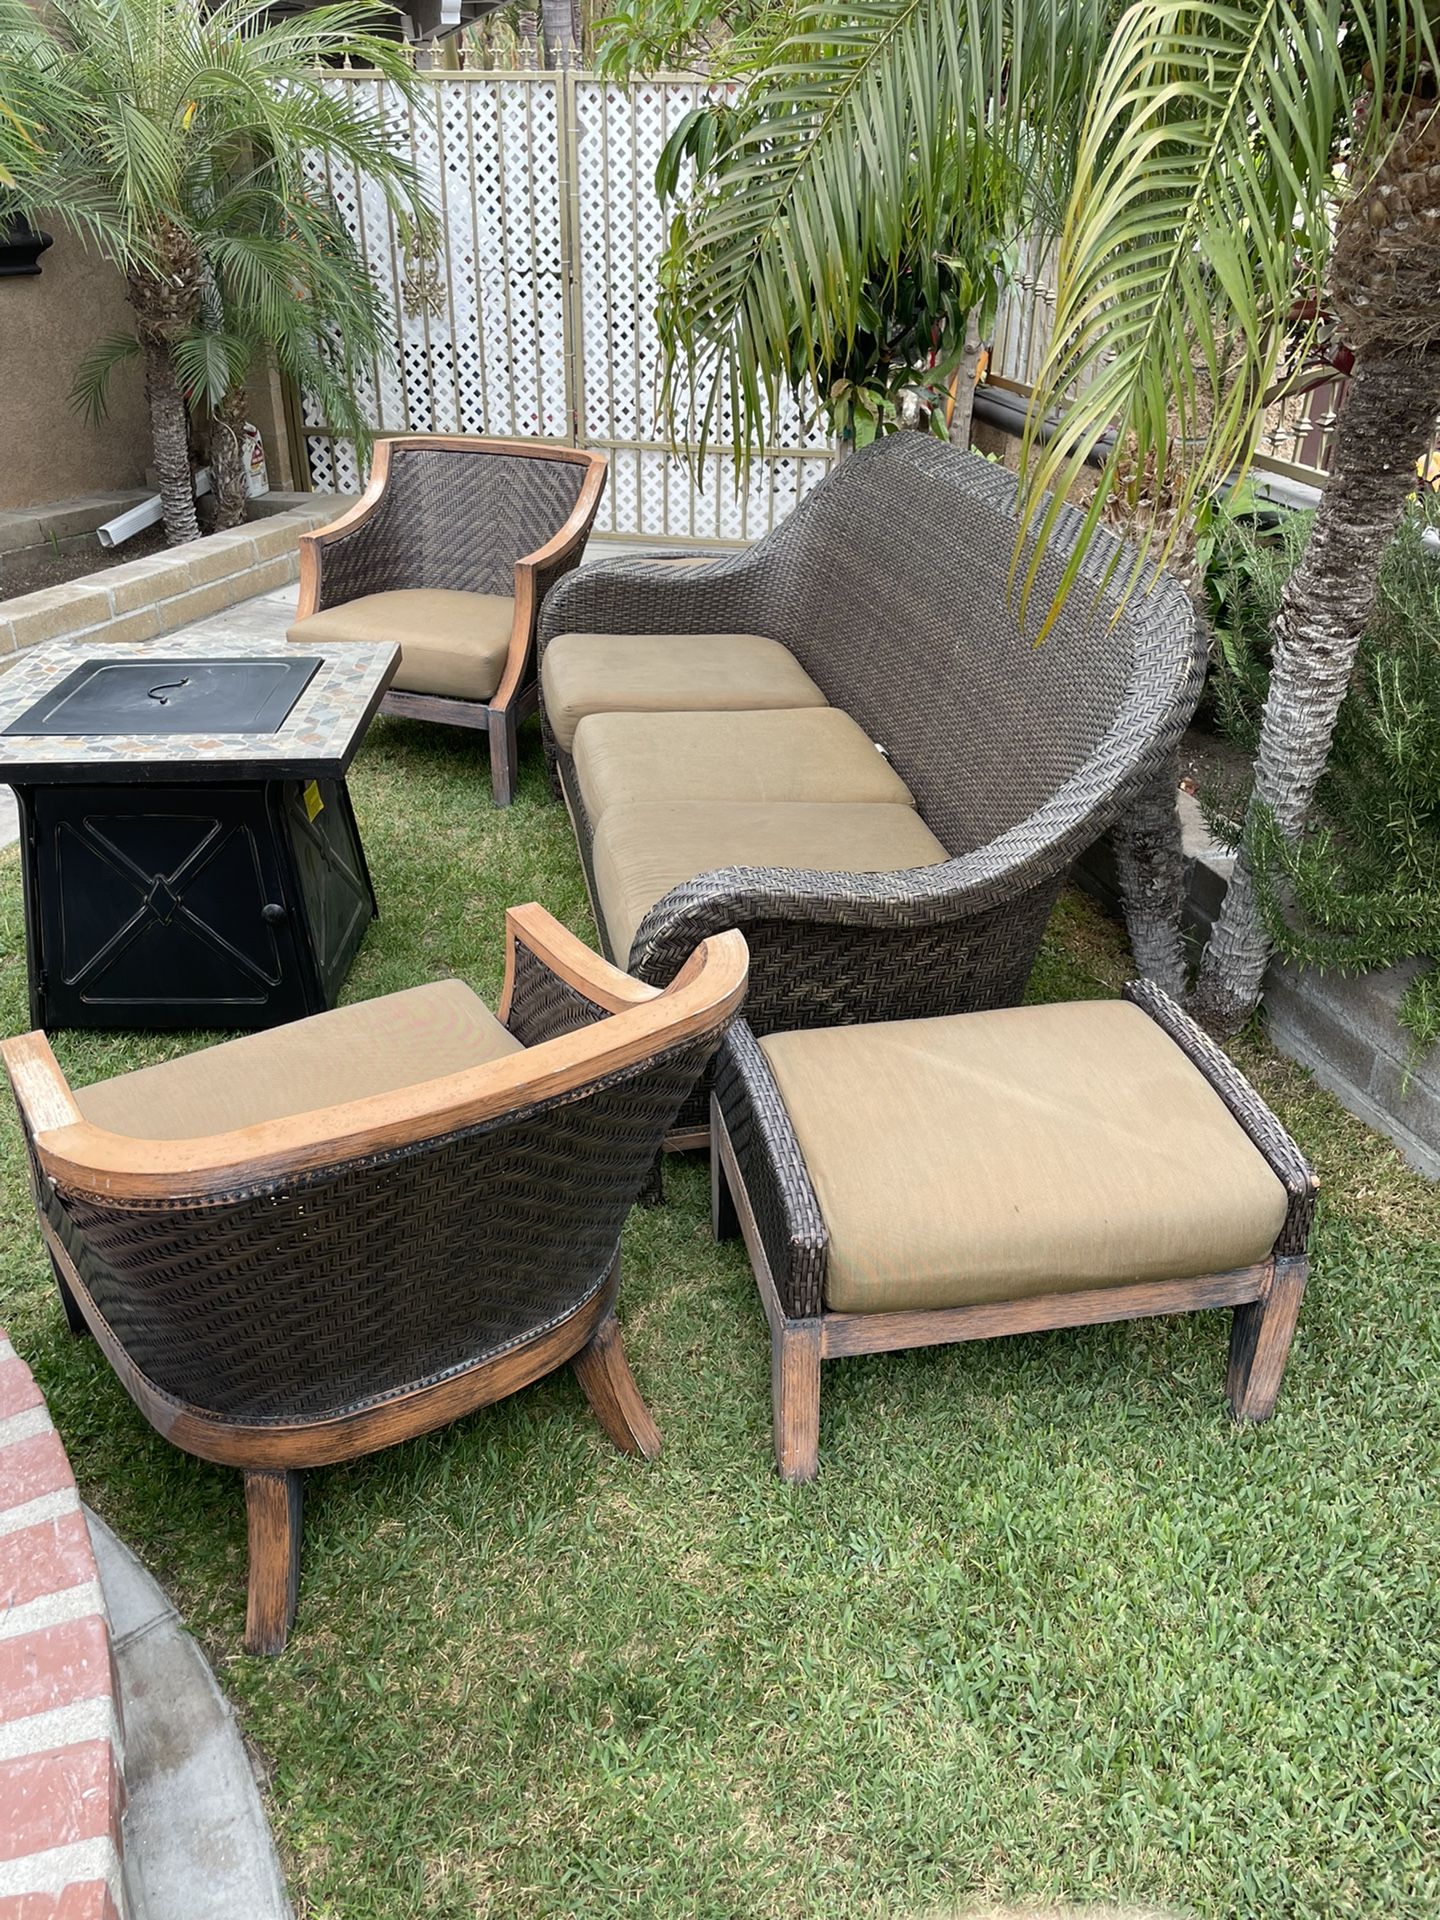 Patio Set/conversation Set/outdoor Furniture /fire Pit Included 